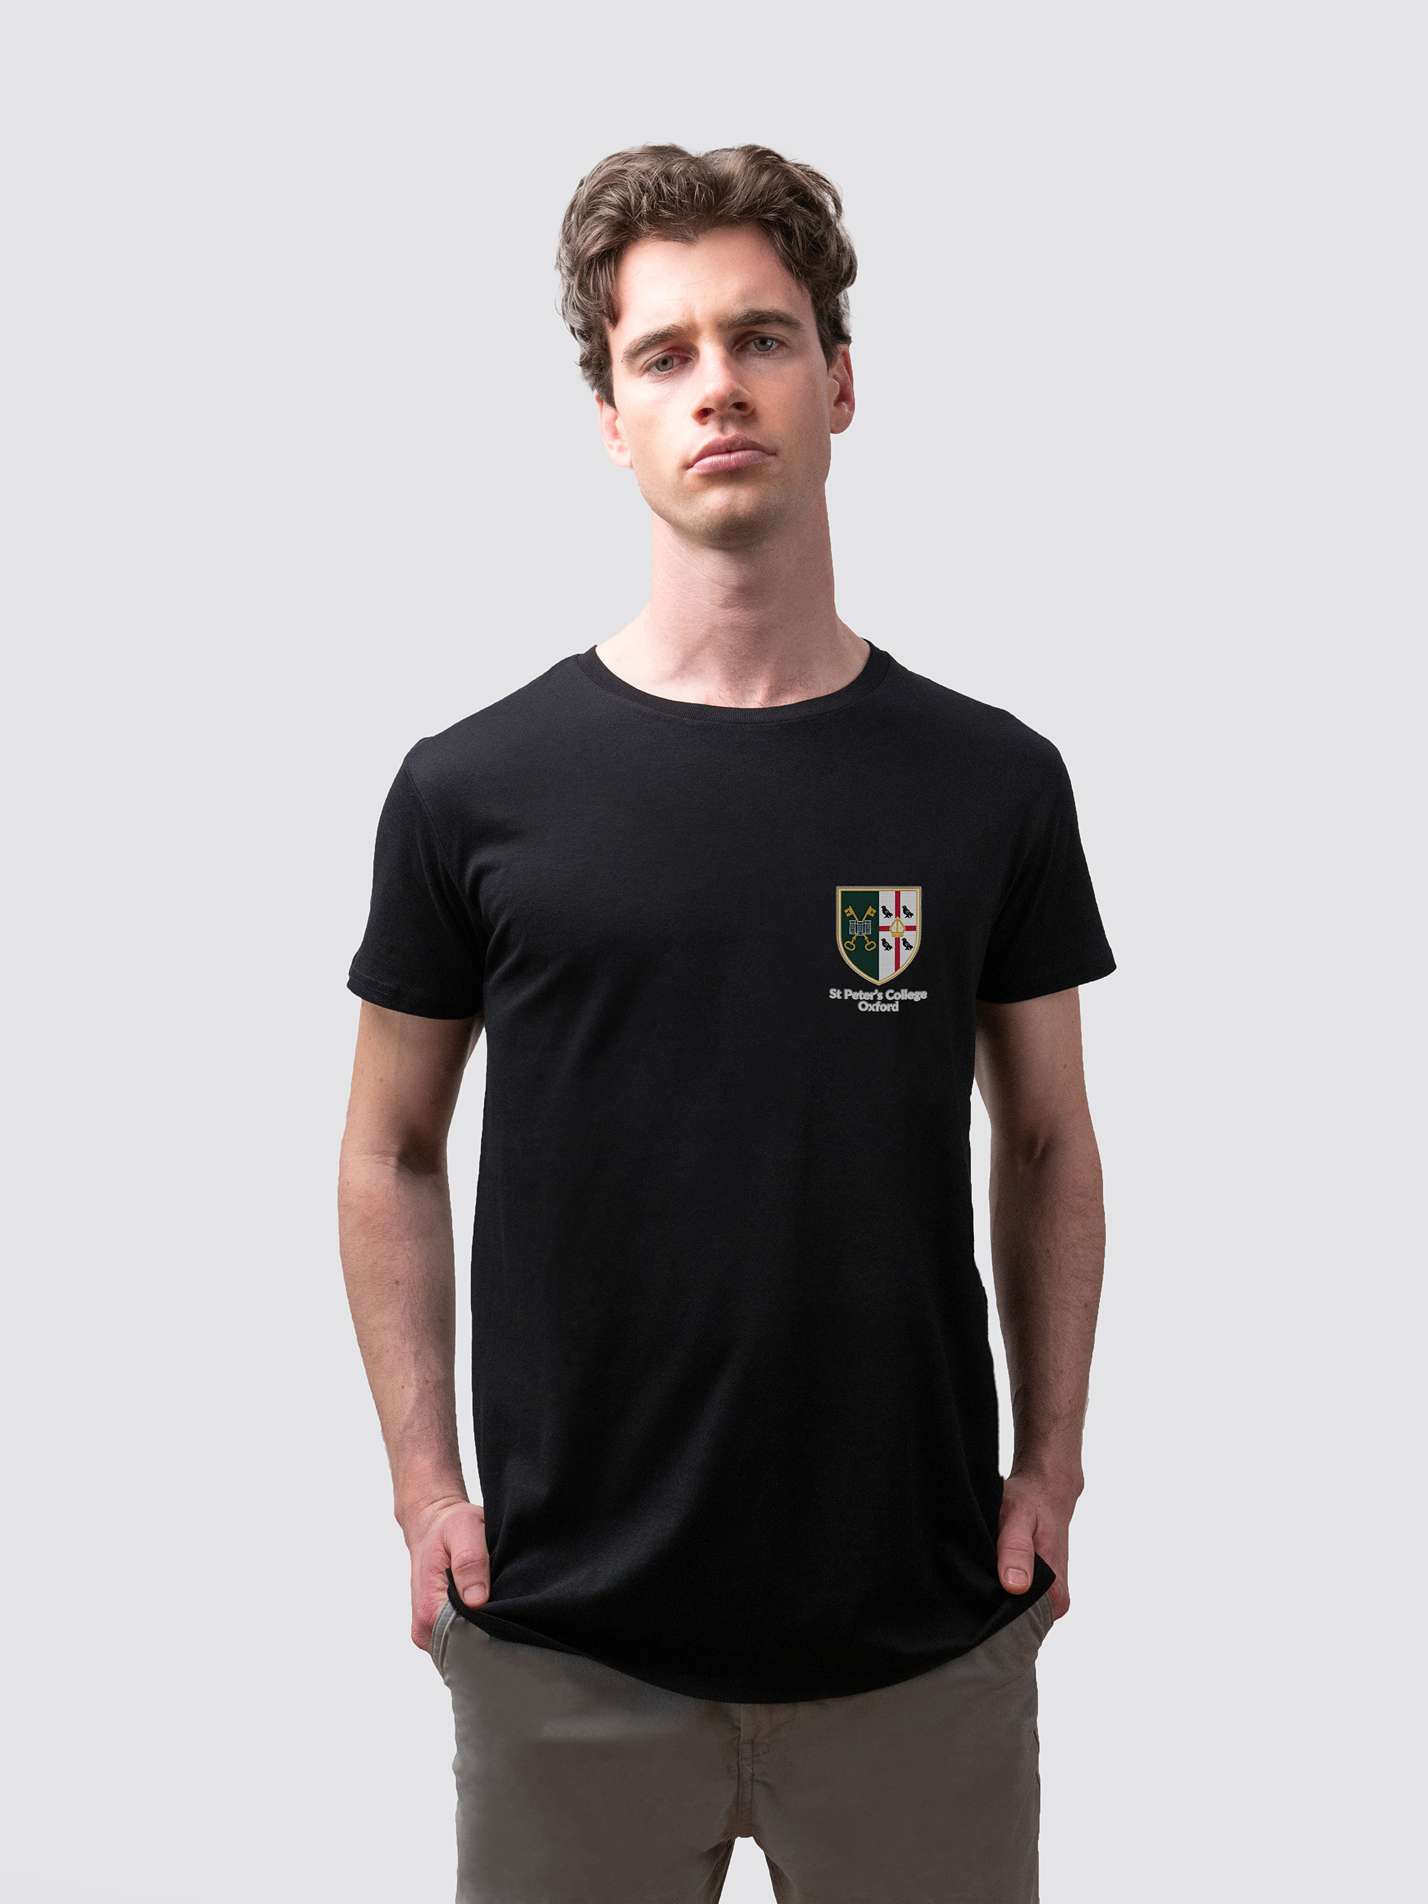 Sustainable St Peter's t-shirt, made from organic cotton